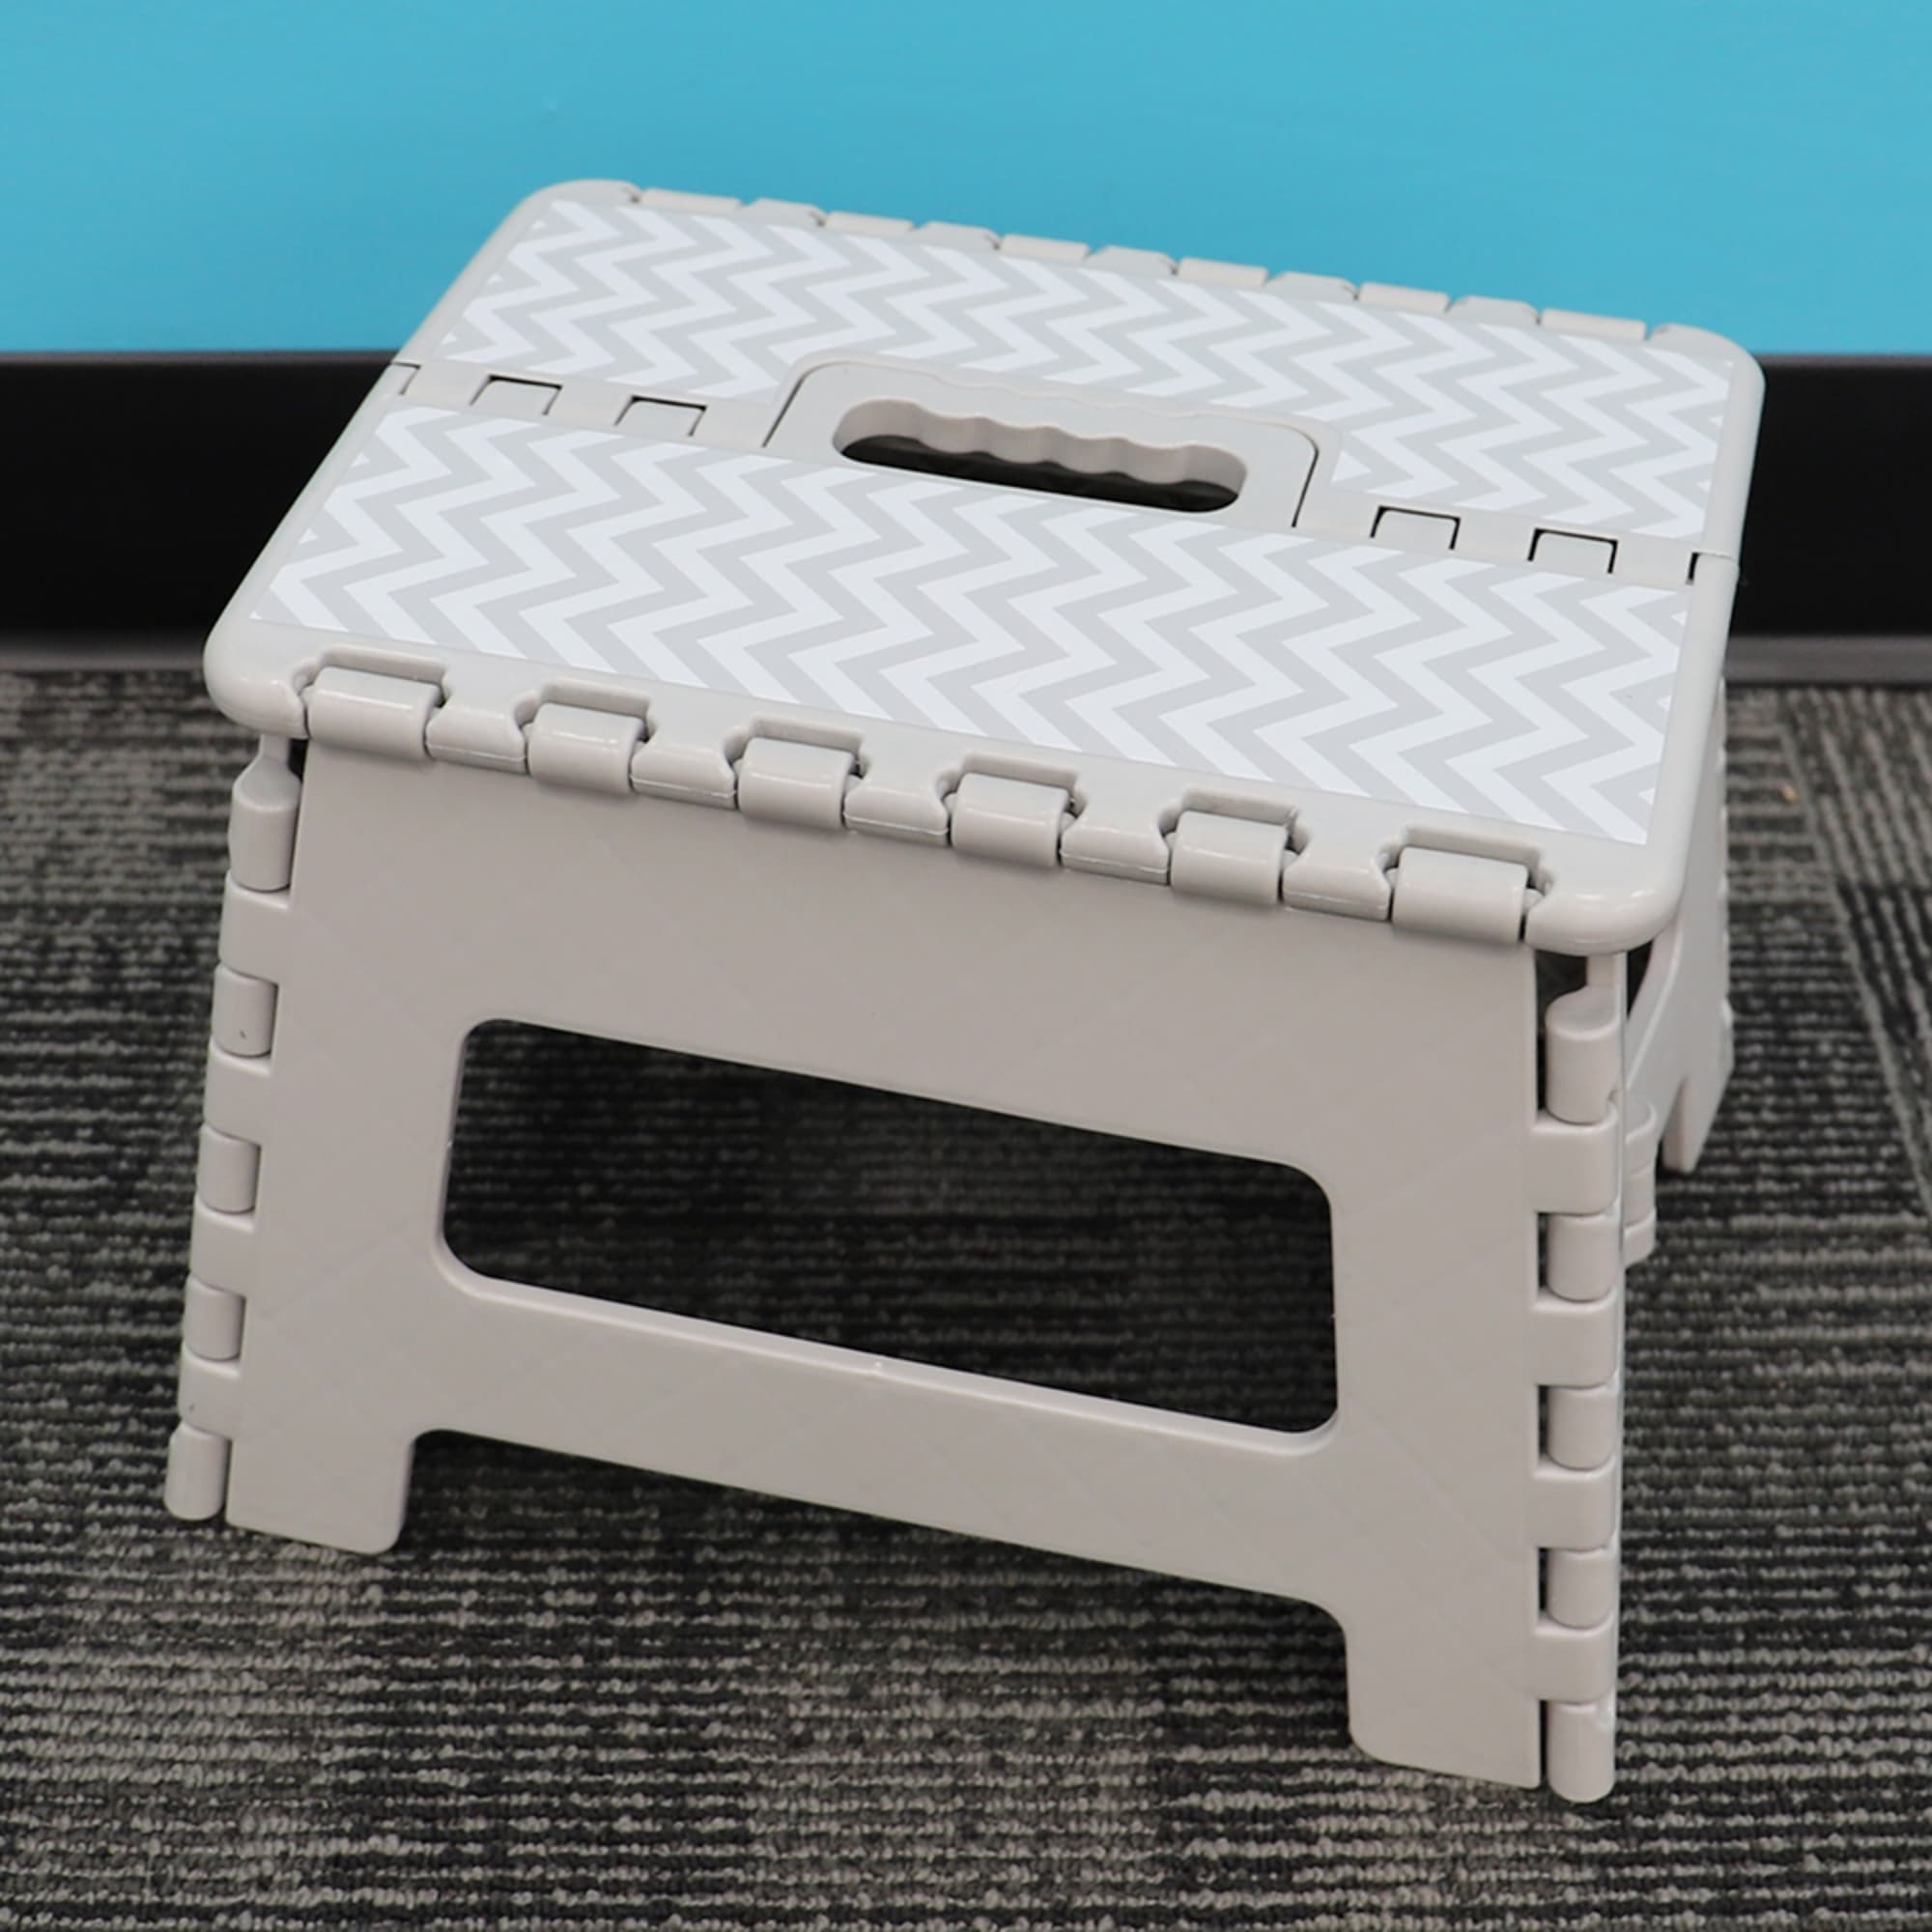 Home Basics Chevron Foldable Plastic Step Stool with Convenient Carrying Handle, Grey $10.00 EACH, CASE PACK OF 12